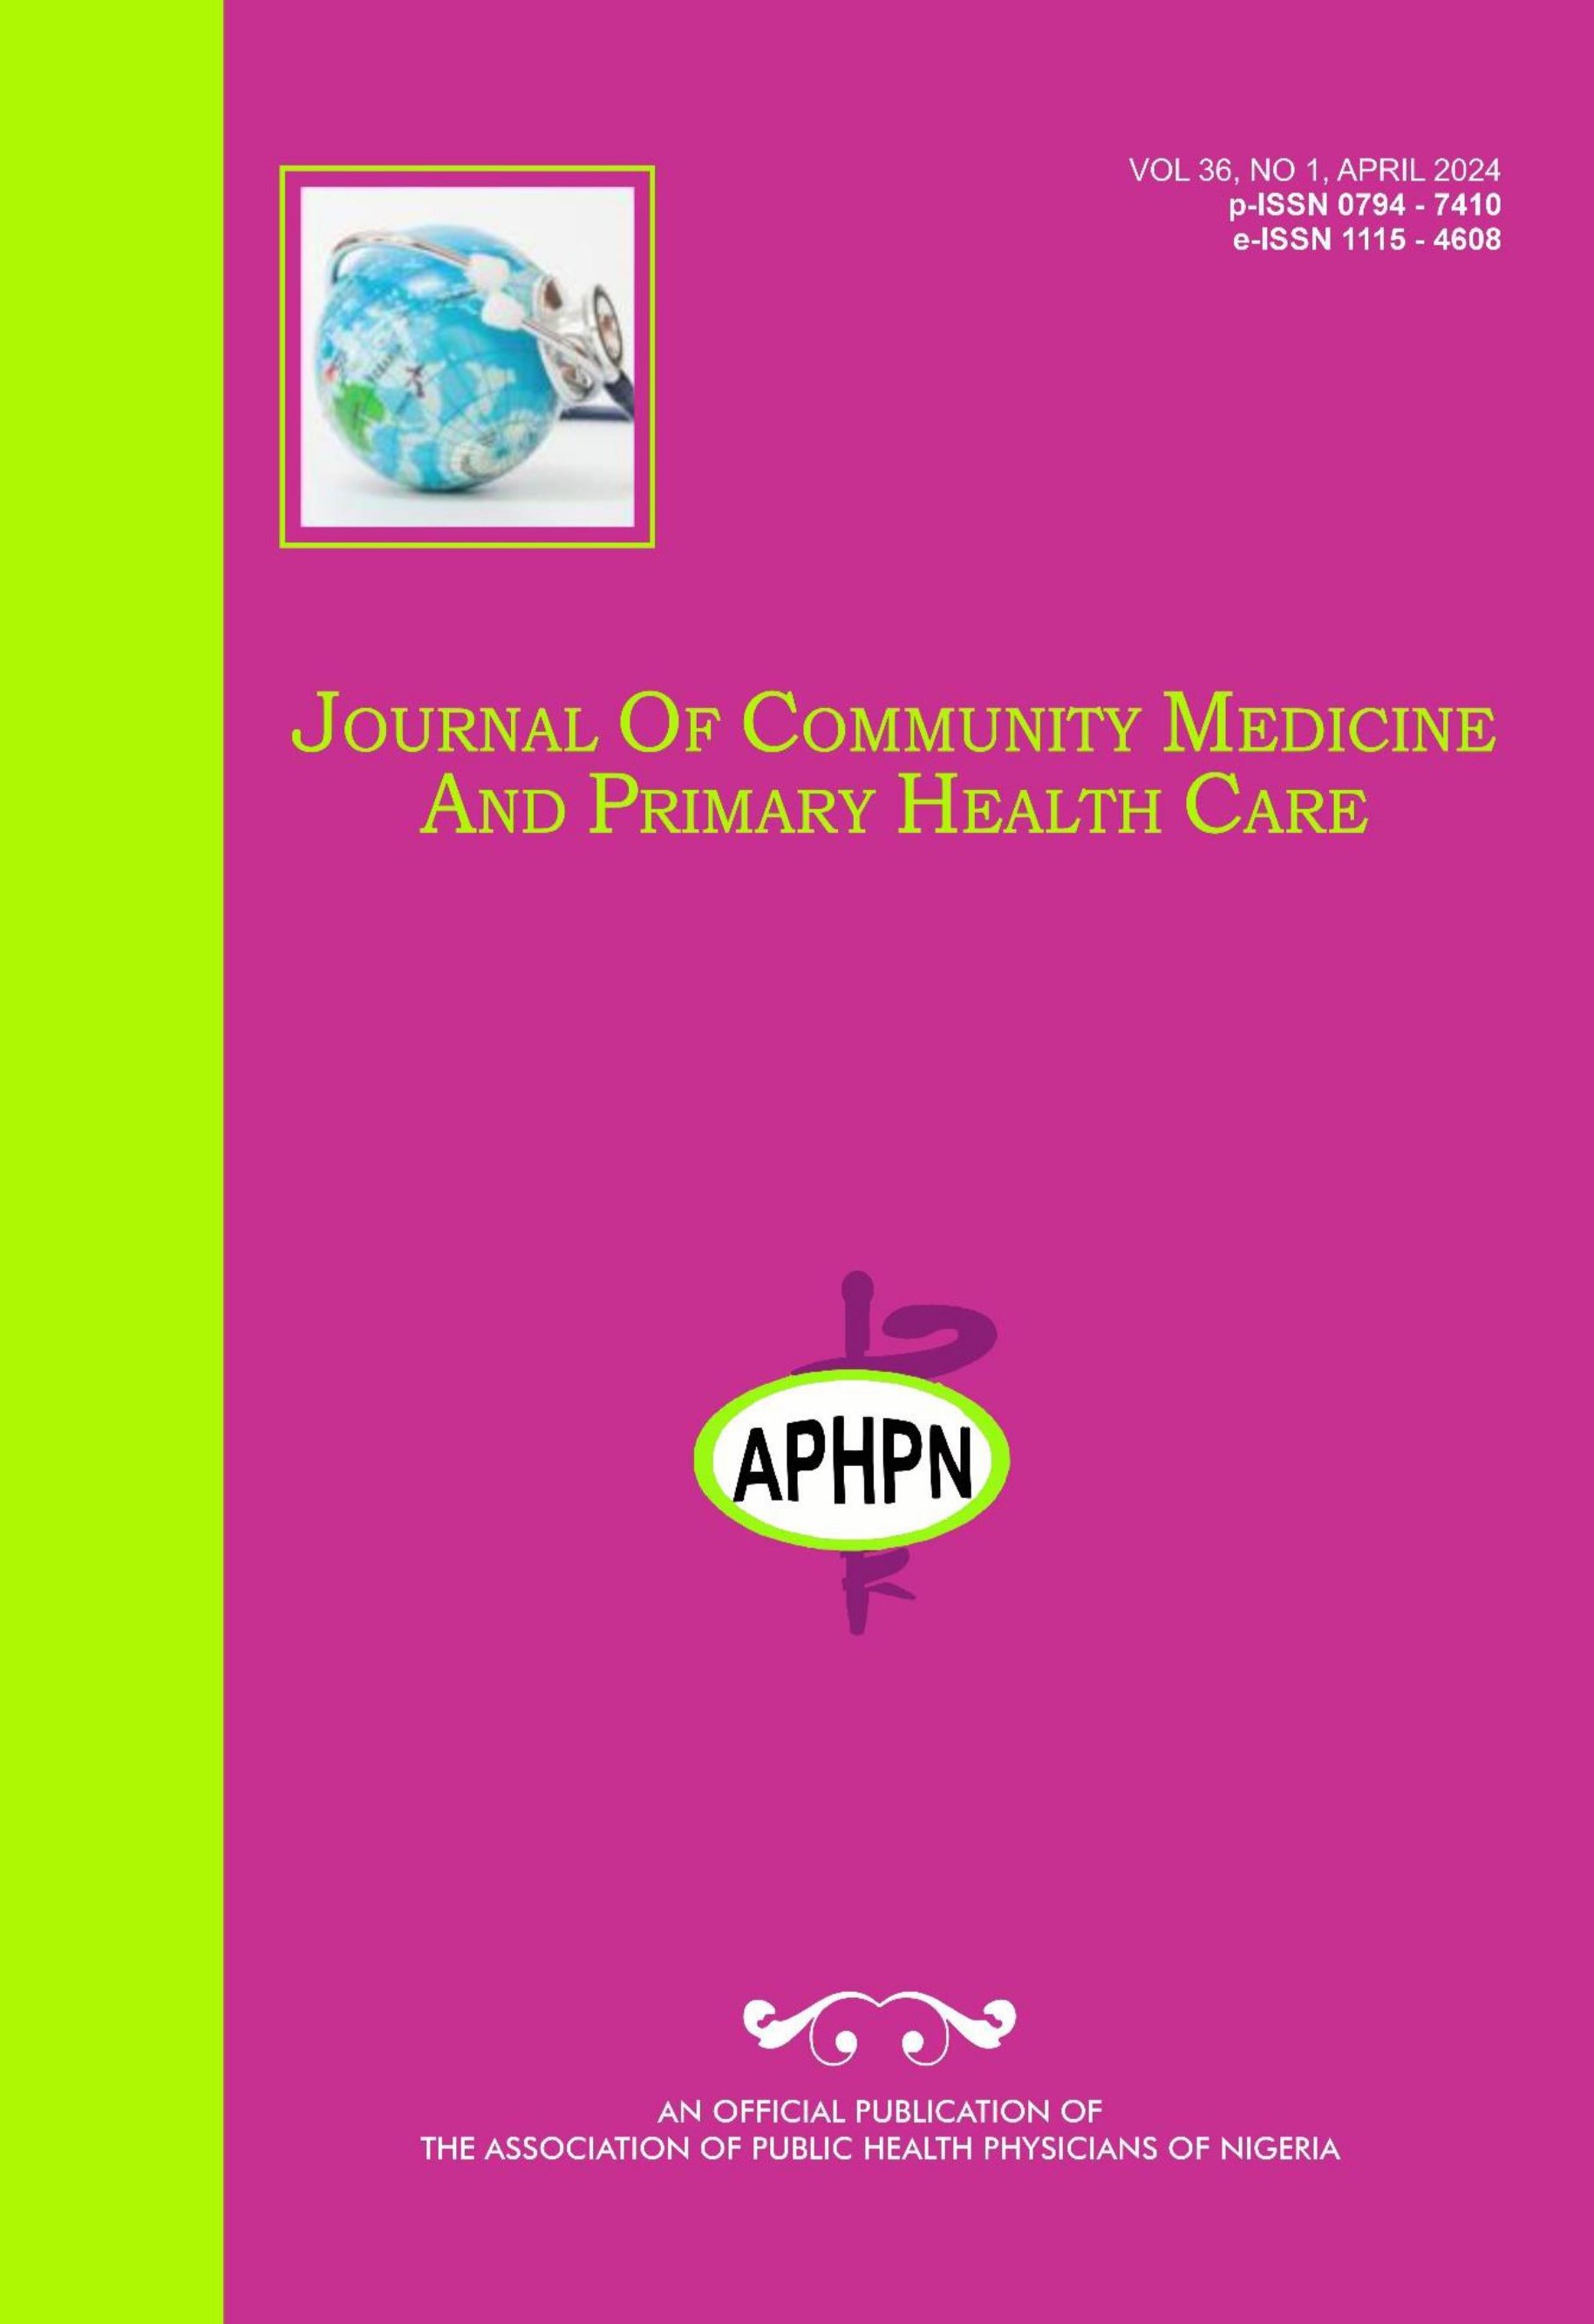 					View Vol. 36 No. 1 (2024): Journal of Community Medicine and Primary Health Care
				